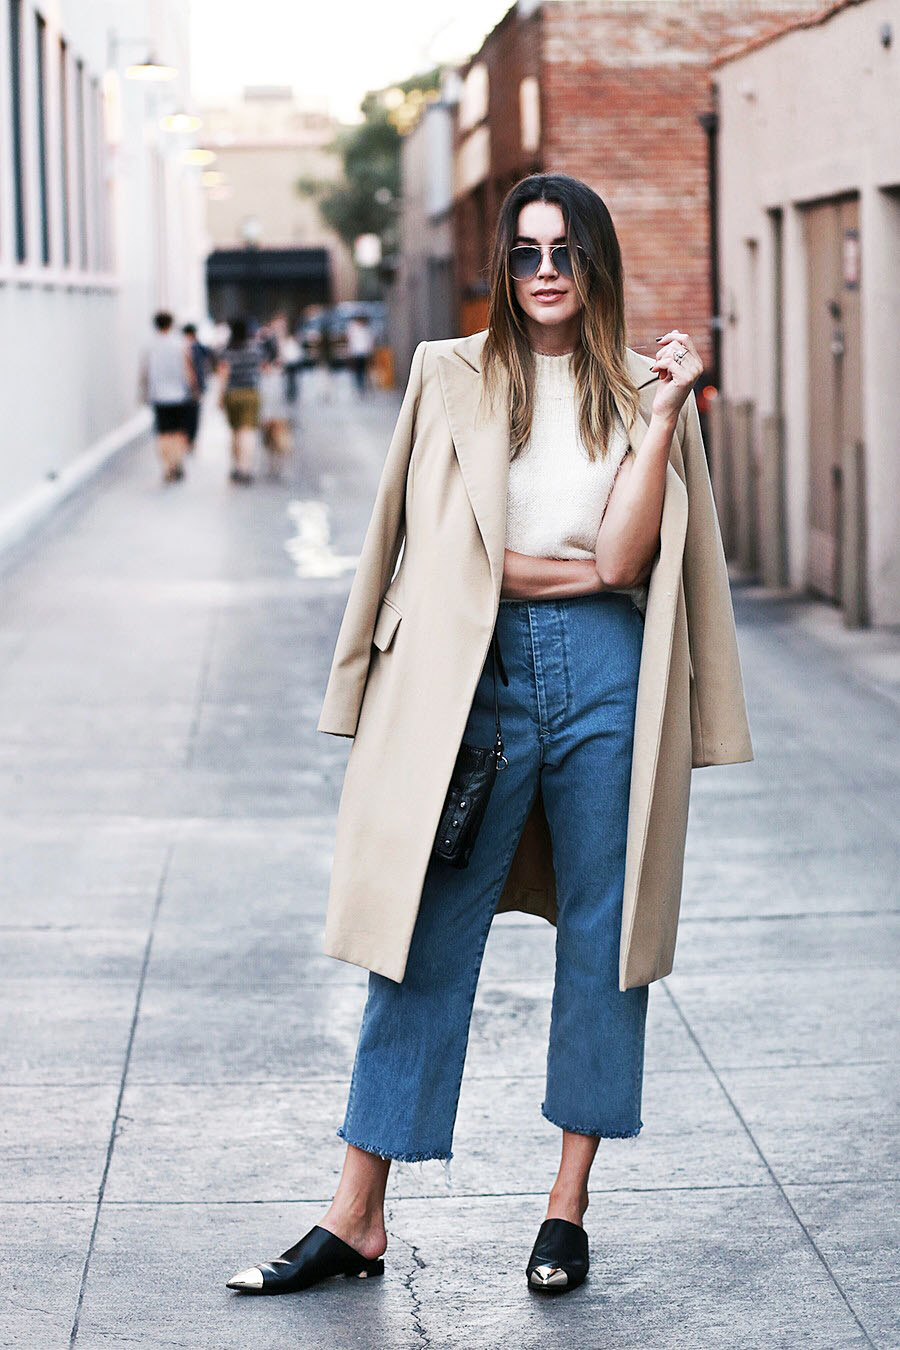 How to wear flat mule shoes on jeans